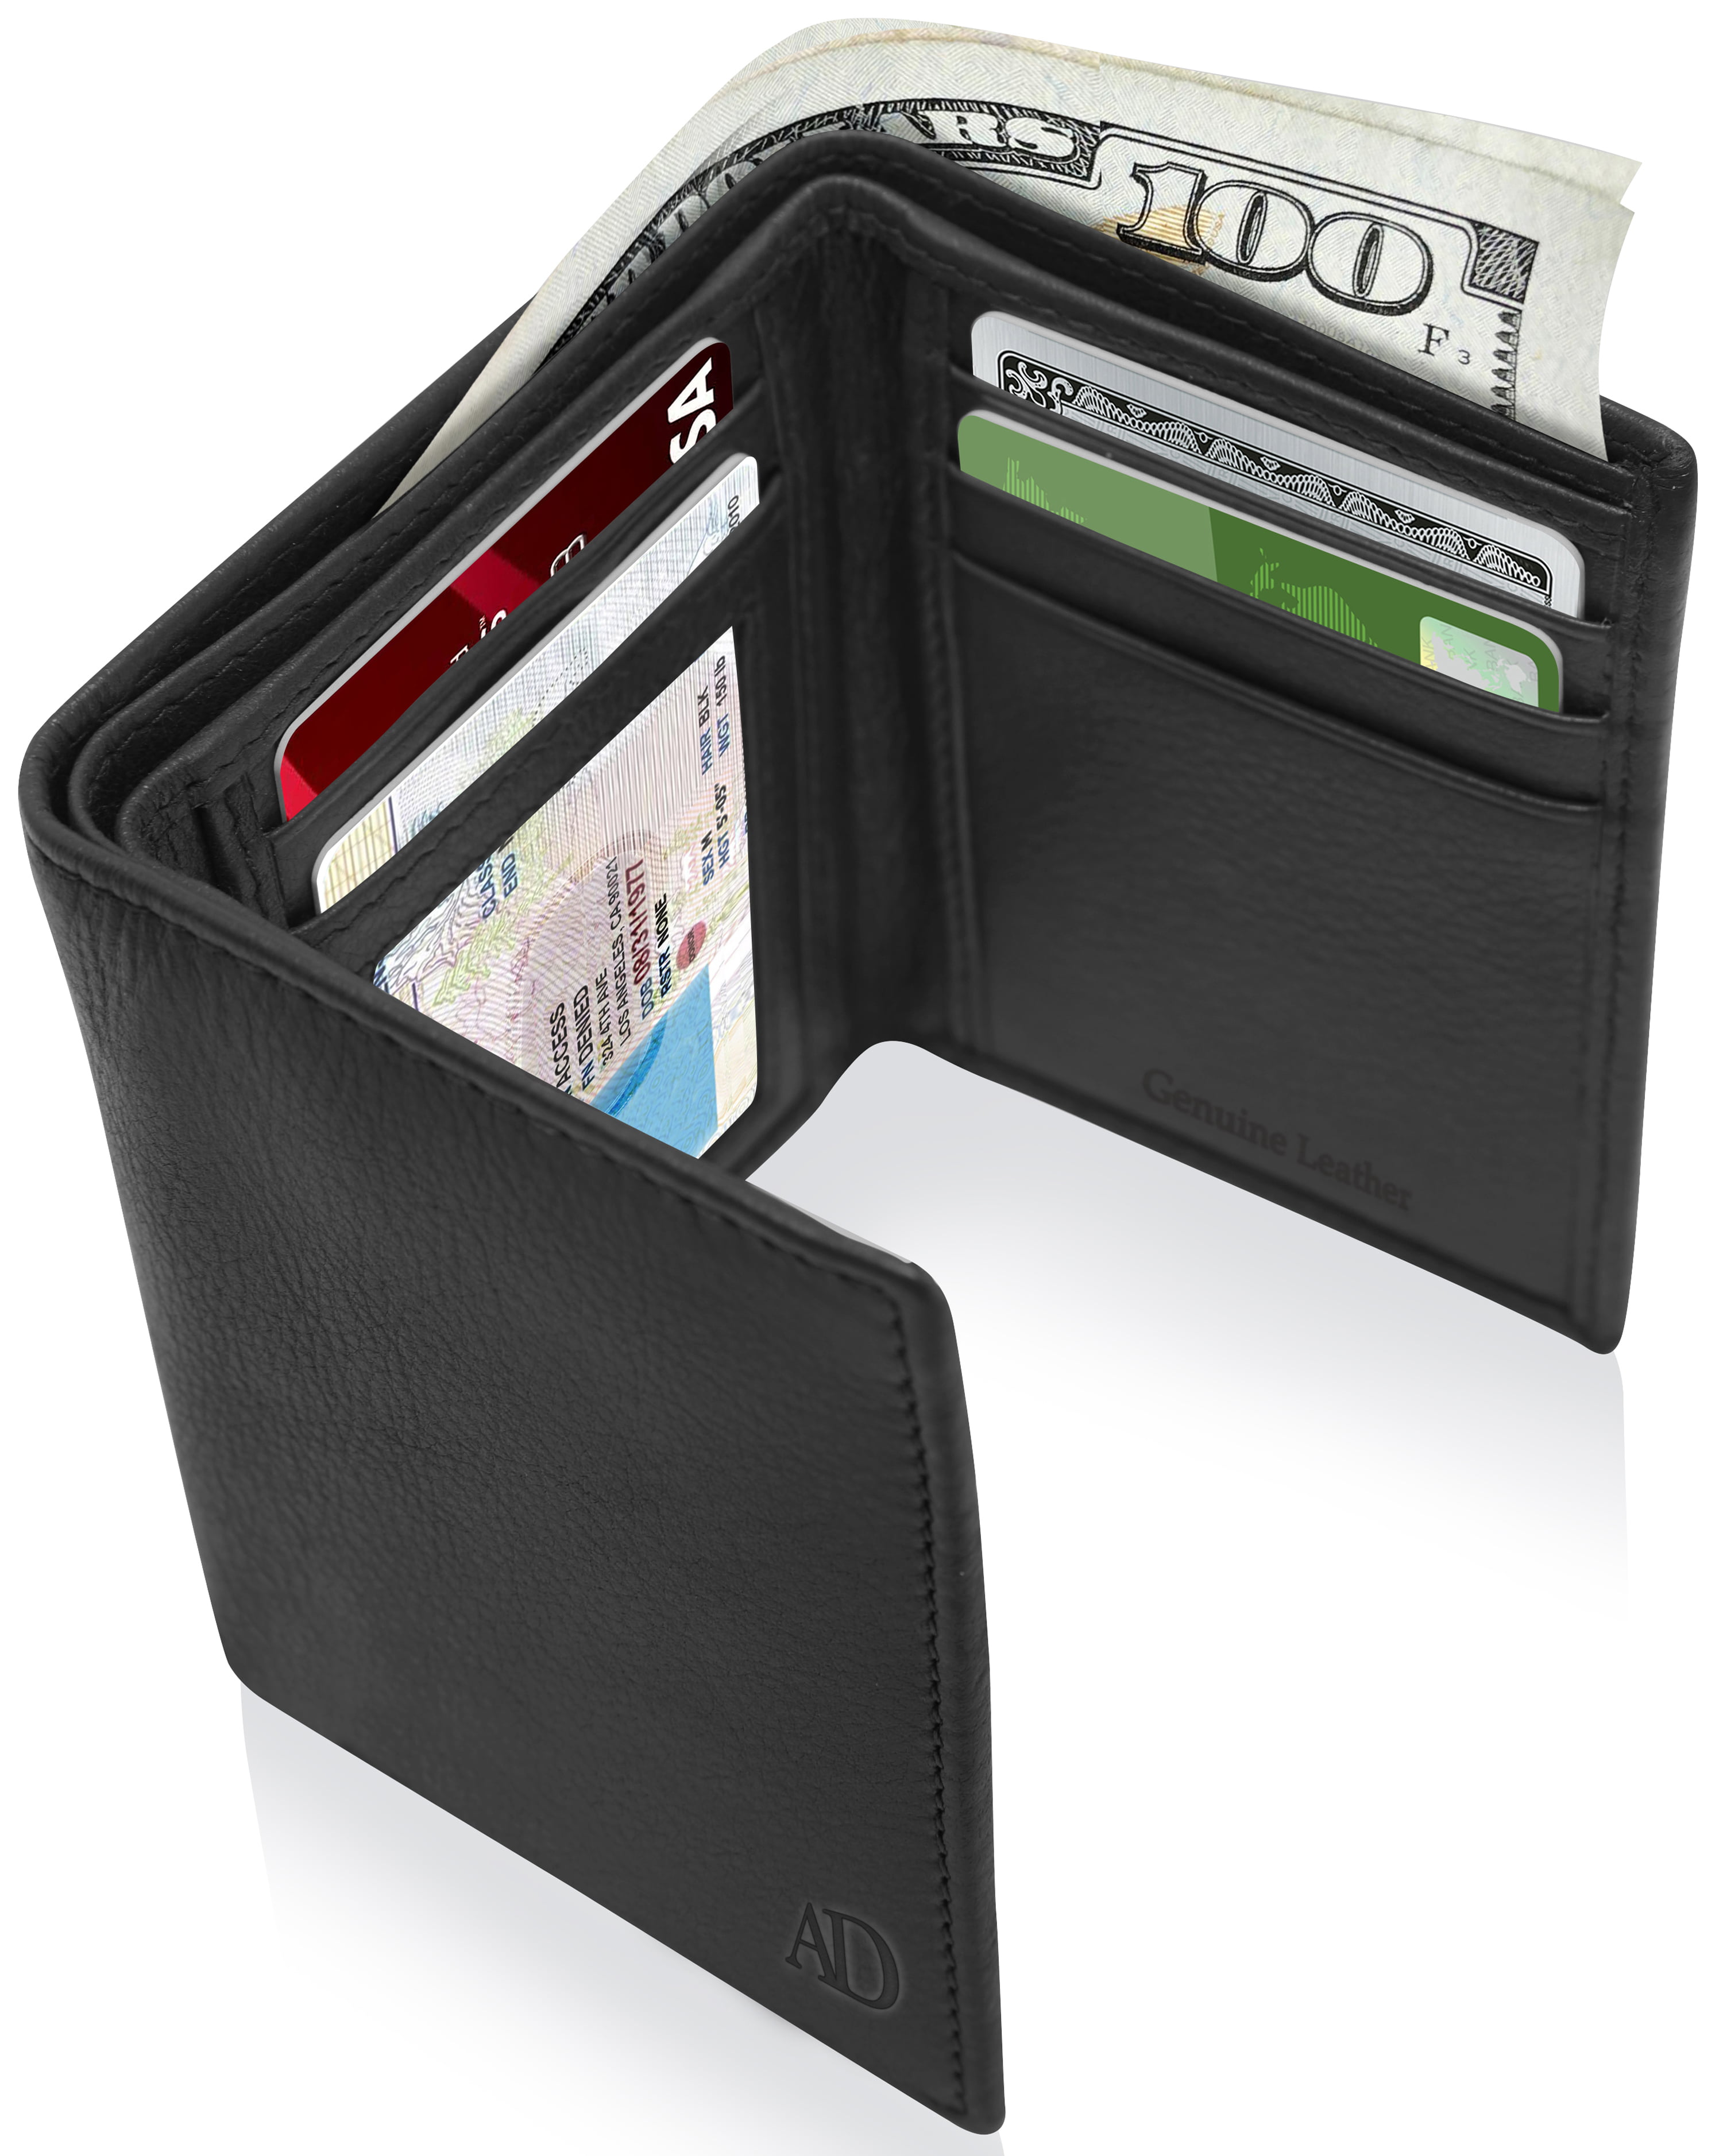 Genuine Leather Wallets For Men - Trifold Mens Wallet With ID Window RFID Blocking - comicsahoy.com